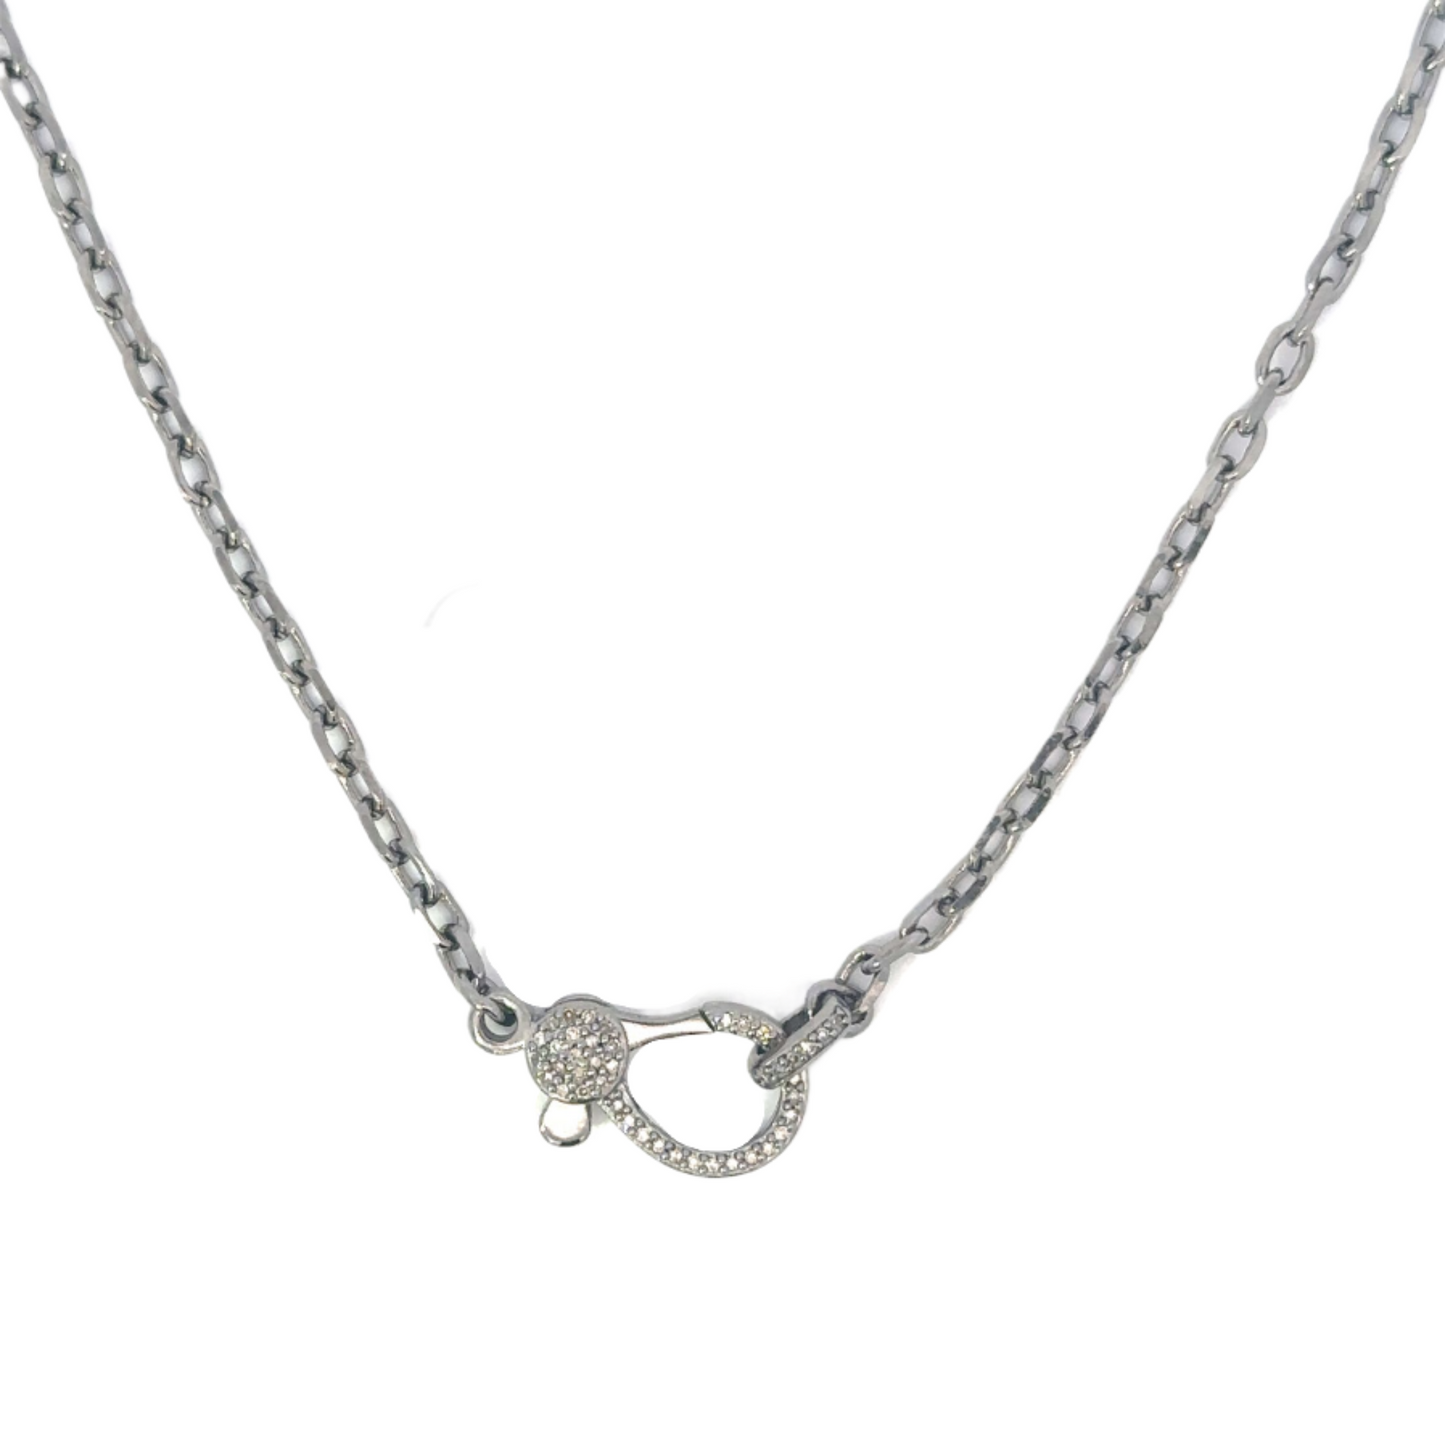 Interlocking Oval Chain Necklace with Pave Lobster